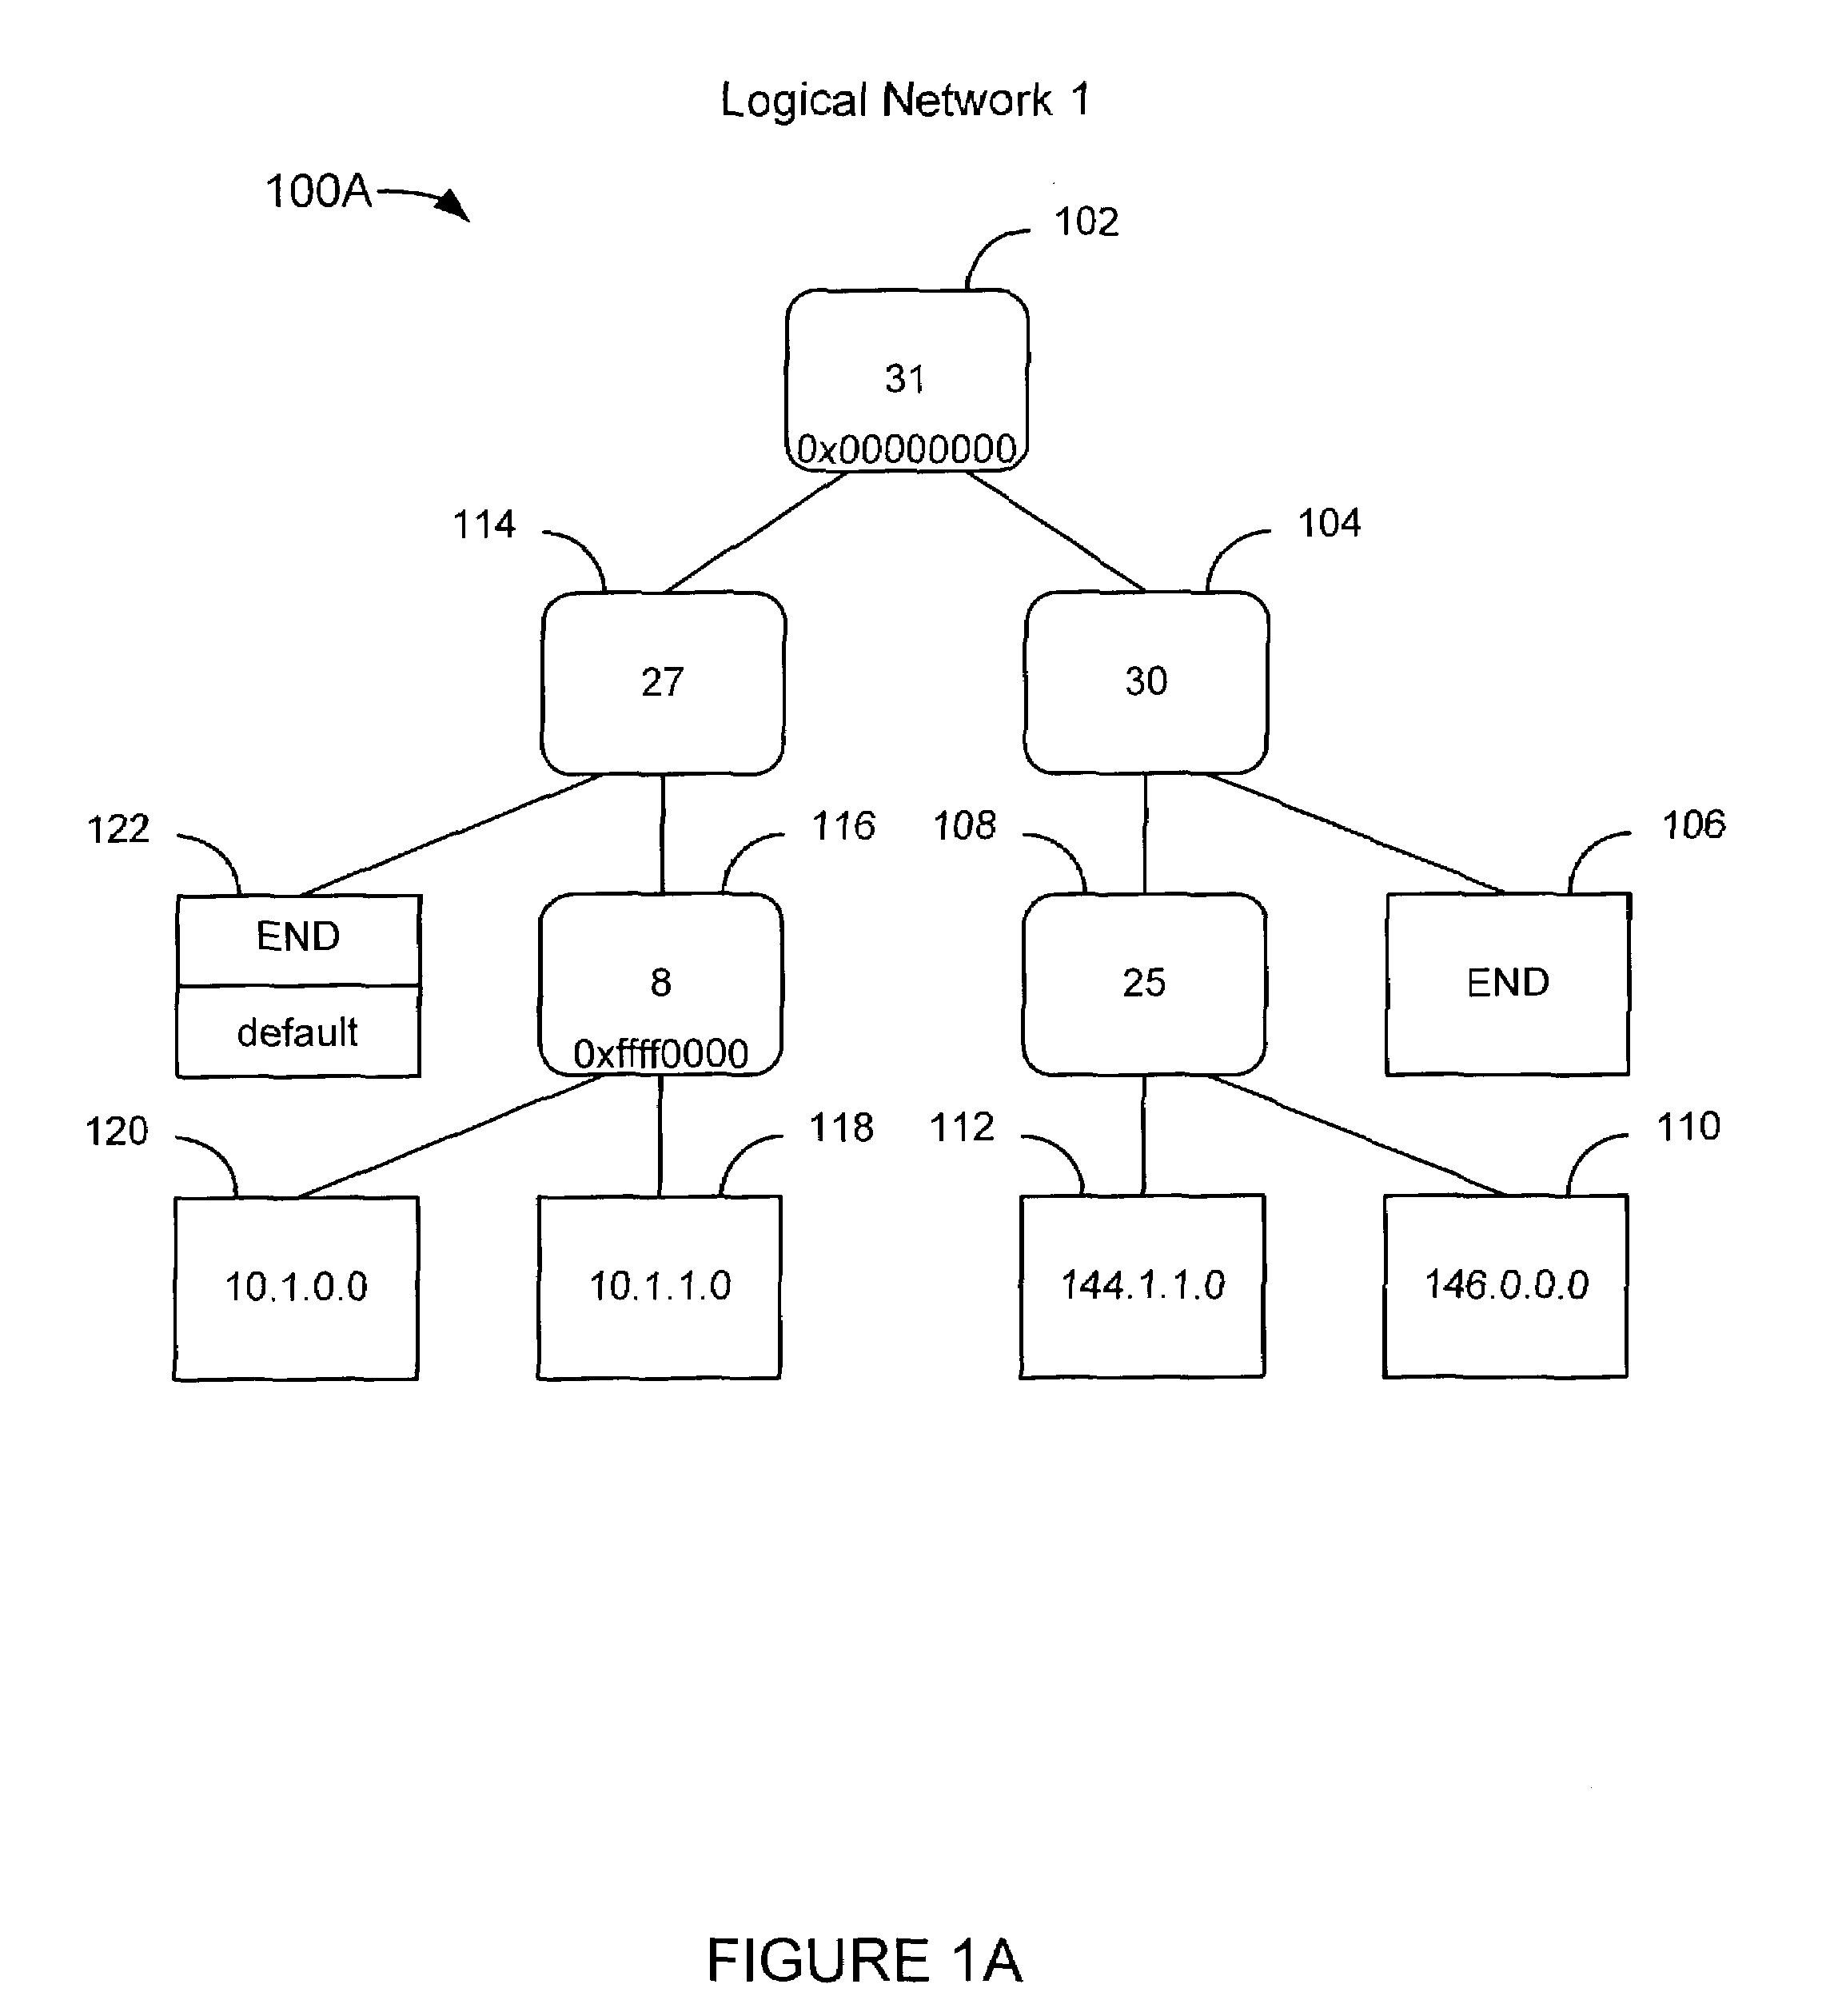 Forwarding traffic in a network using a single forwarding table that includes forwarding information related to a plurality of logical networks